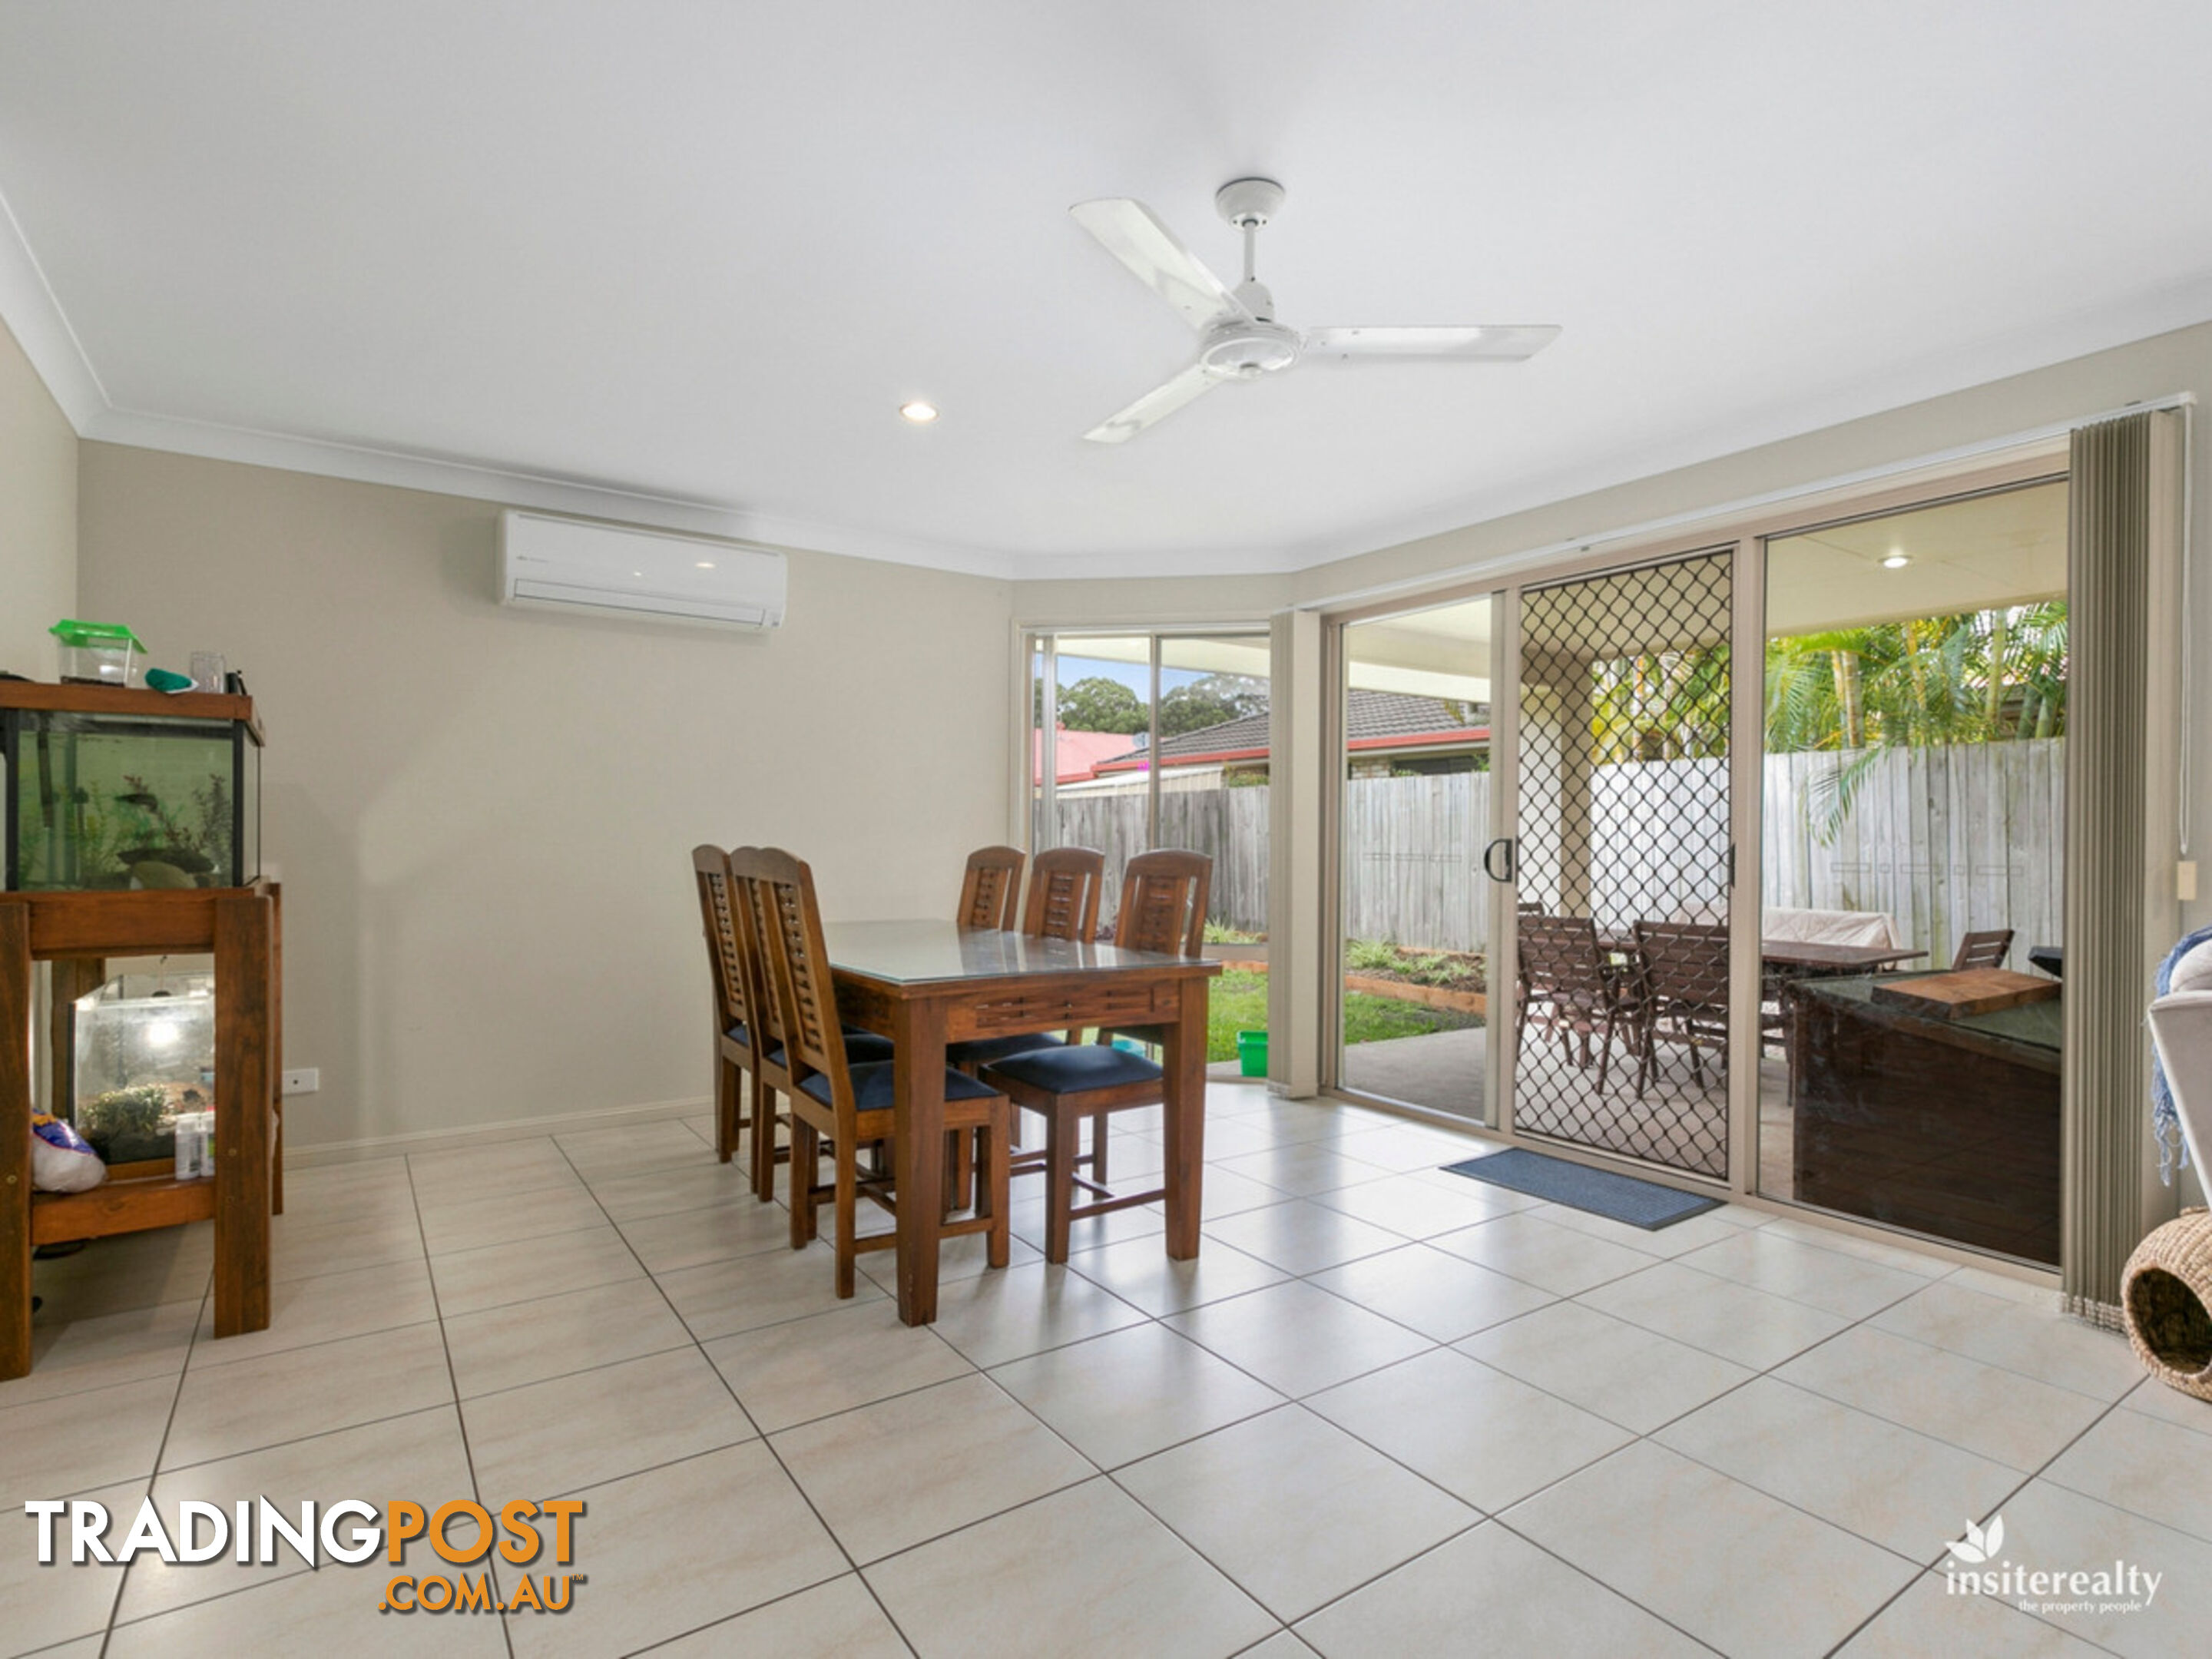 36 Magellan Crescent Sippy Downs QLD 4556